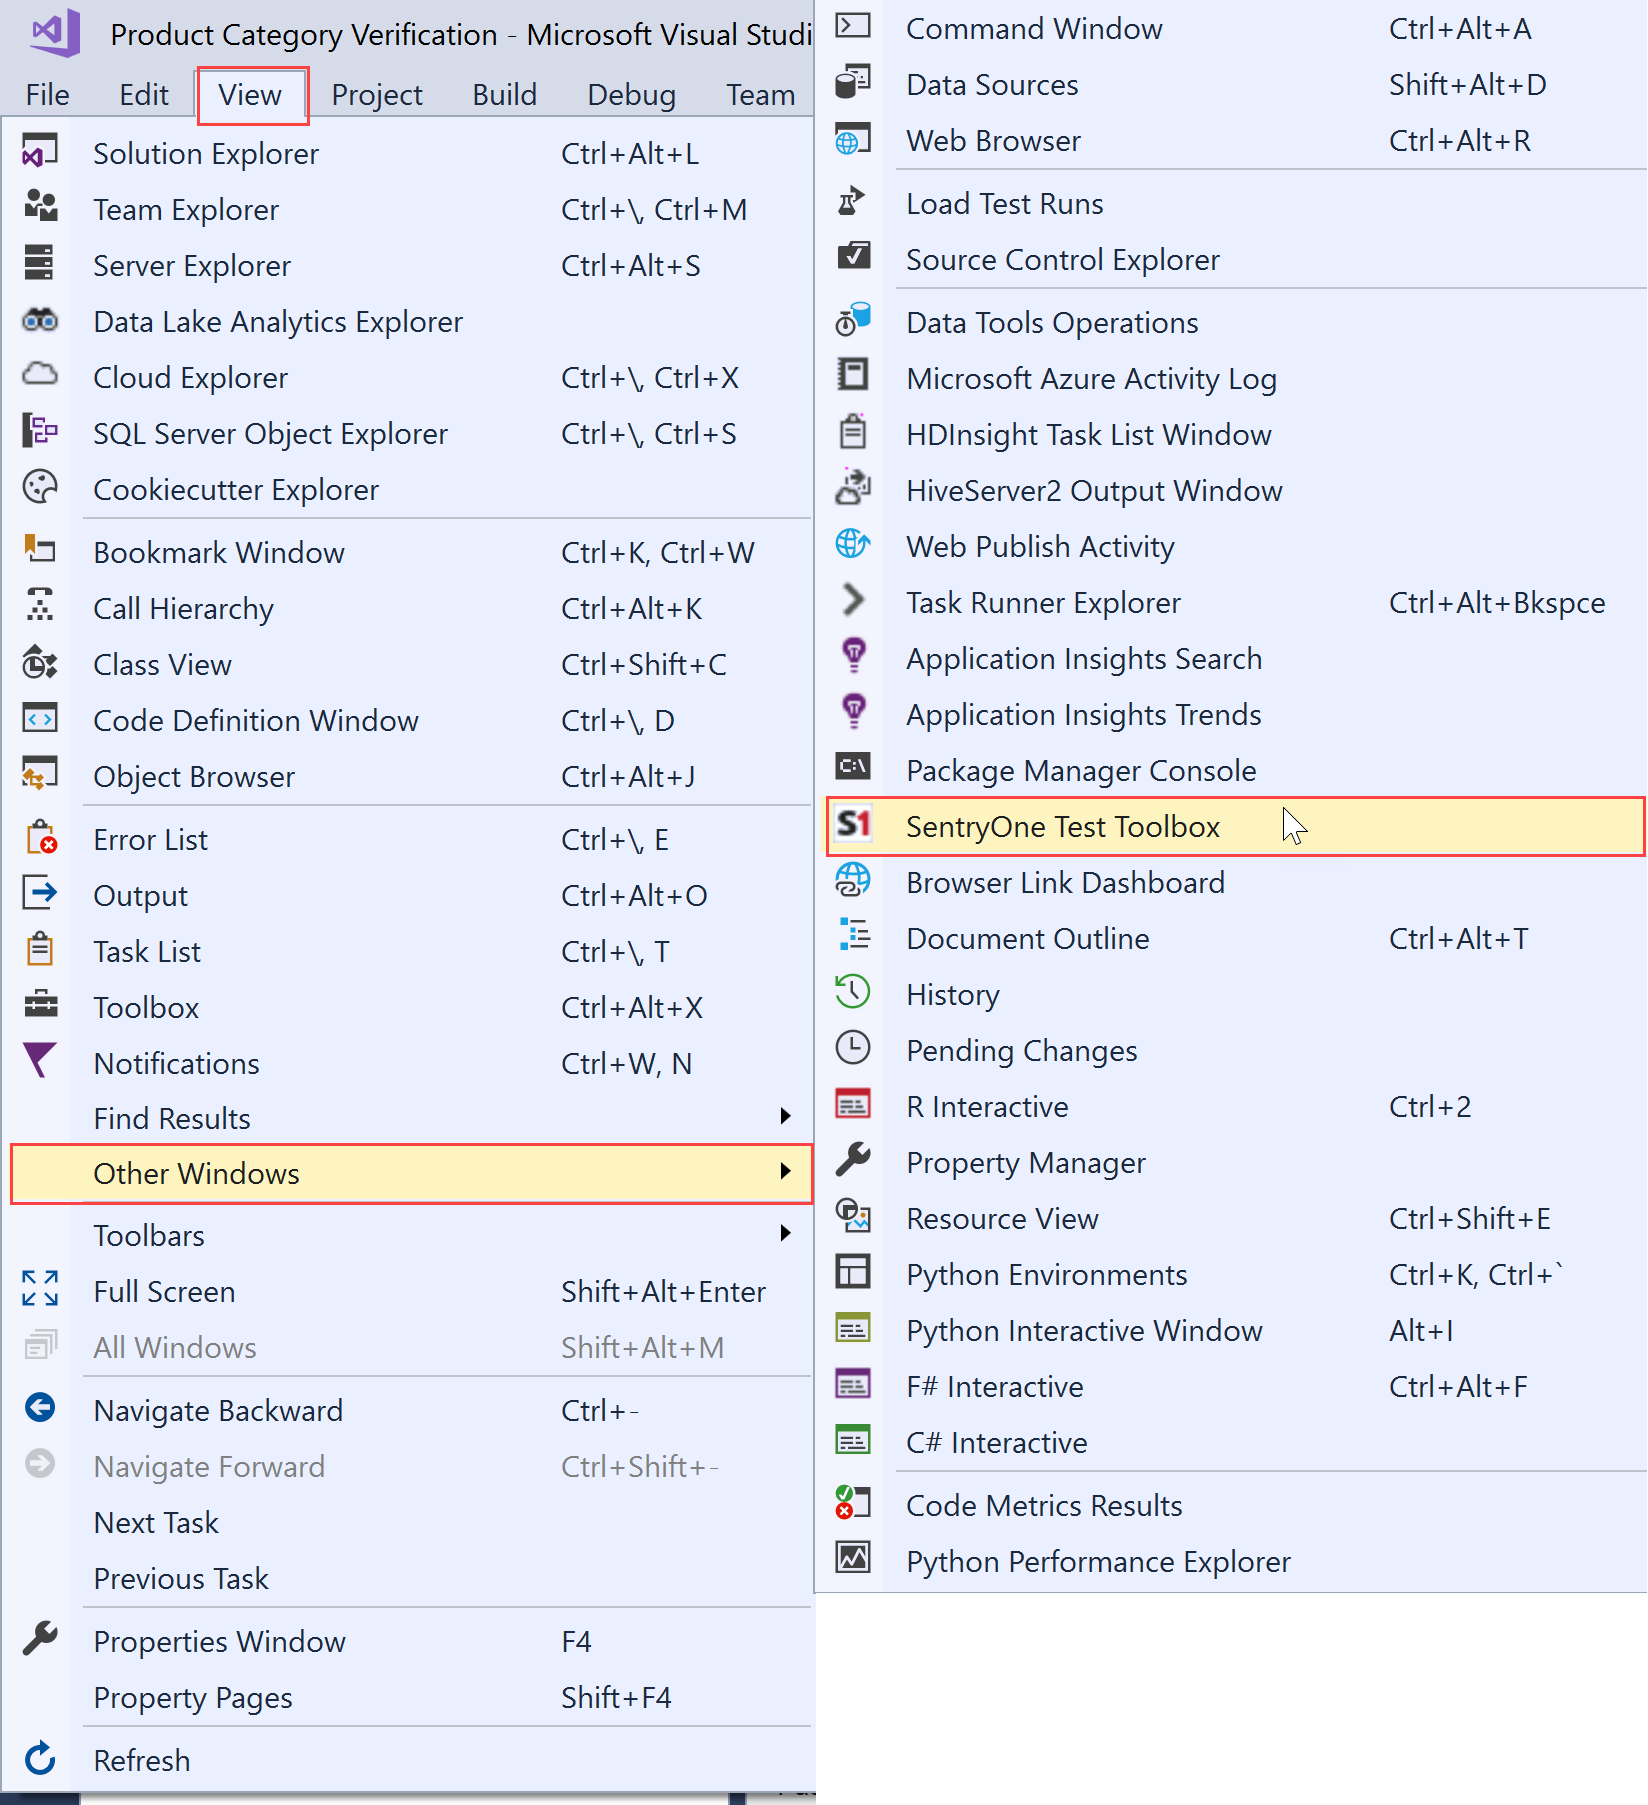 SentryOne Test Open the SentryOne Test Toolbox in Visual Studio